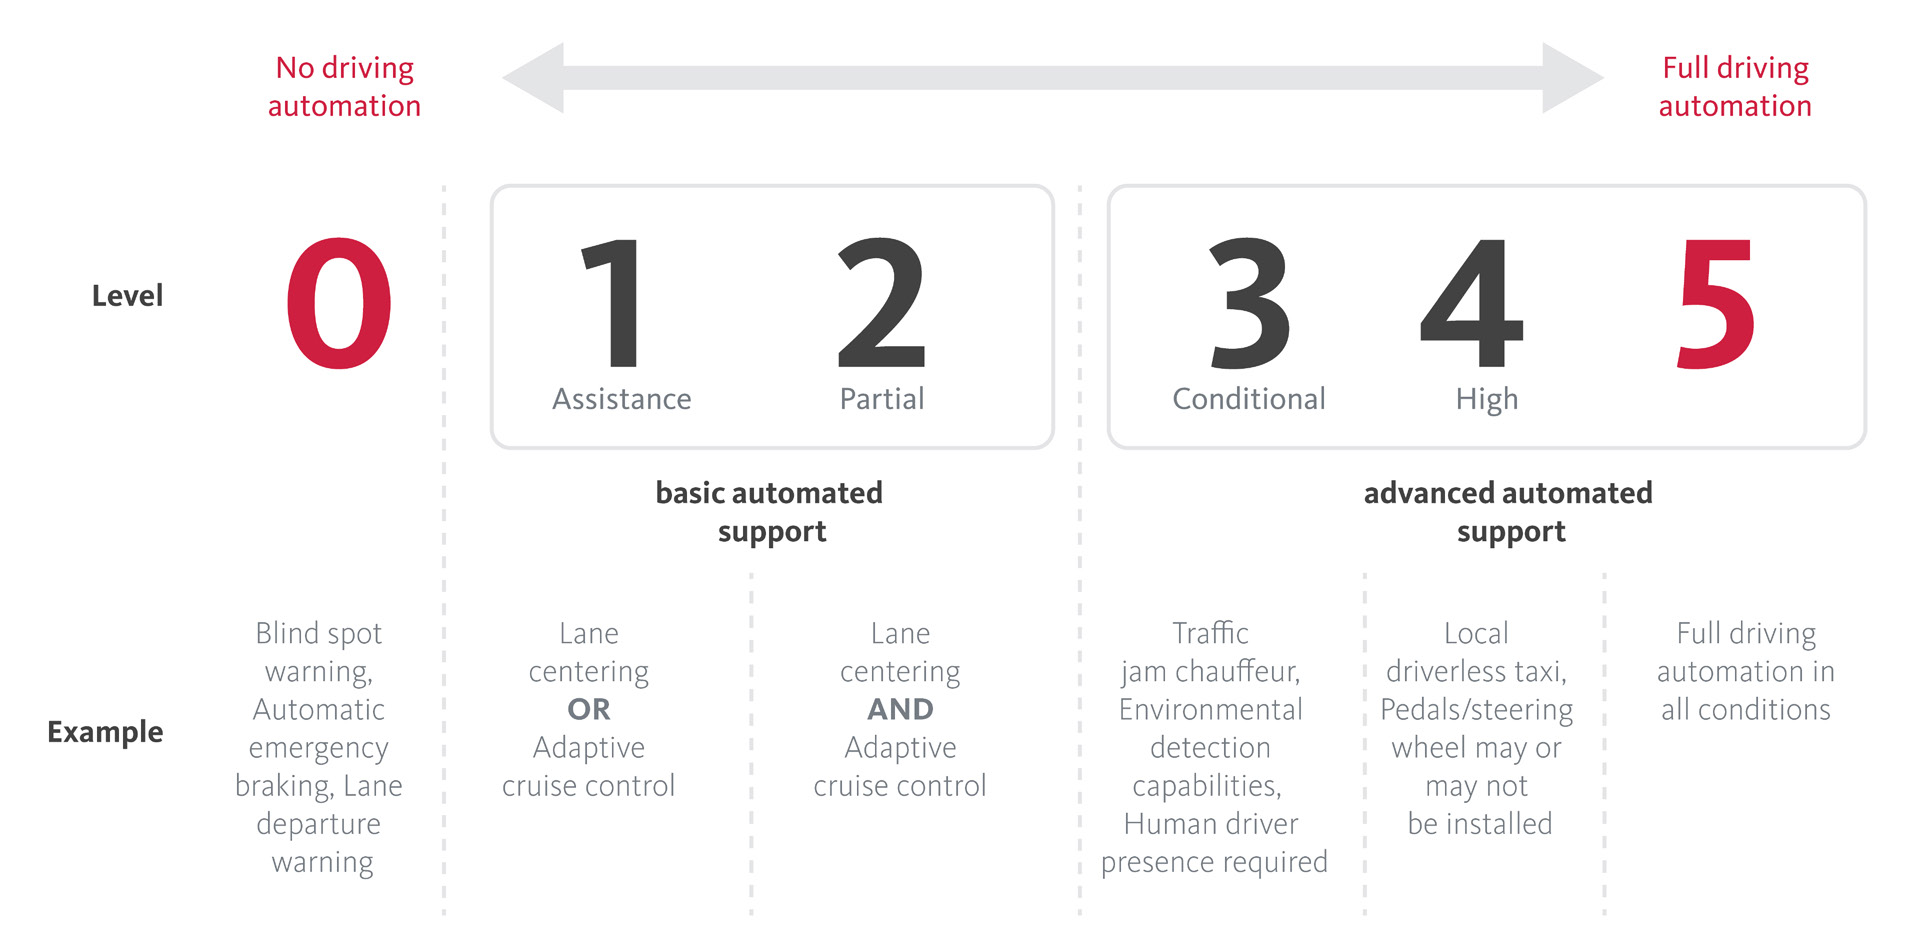 six levels of driving automation